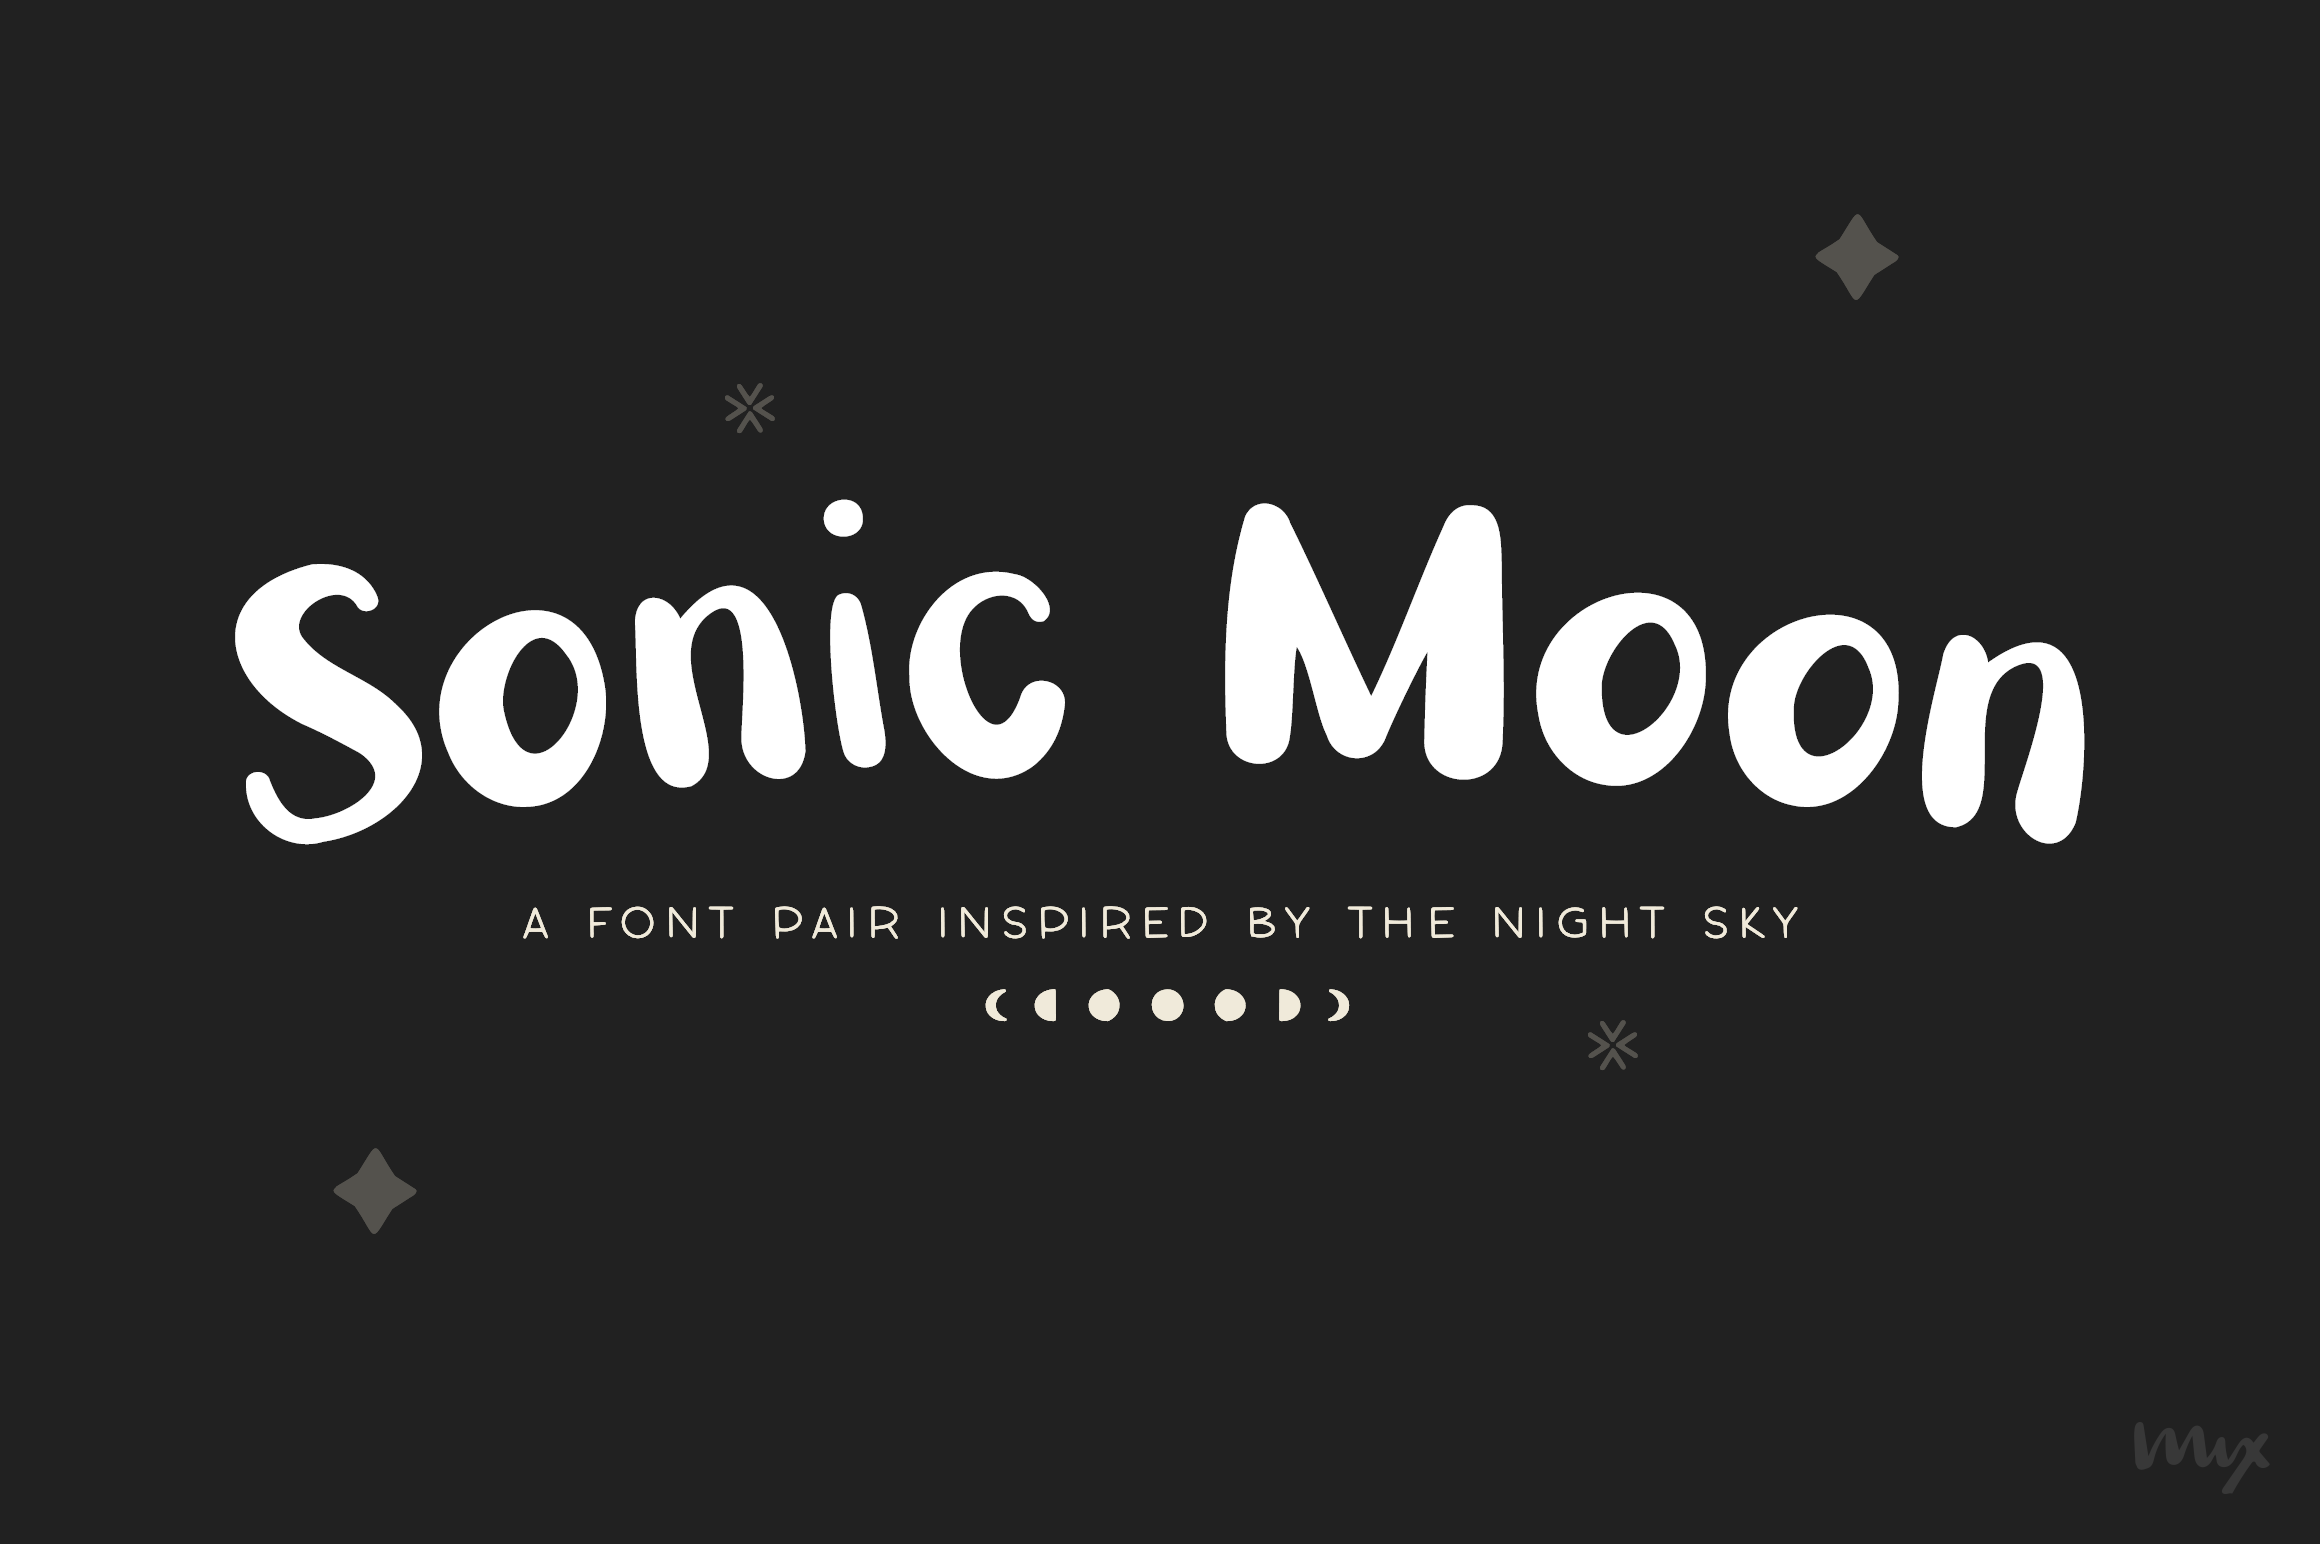 _Creative-Market-Mix-Sonic-Moon-Sonic-Star-Cover